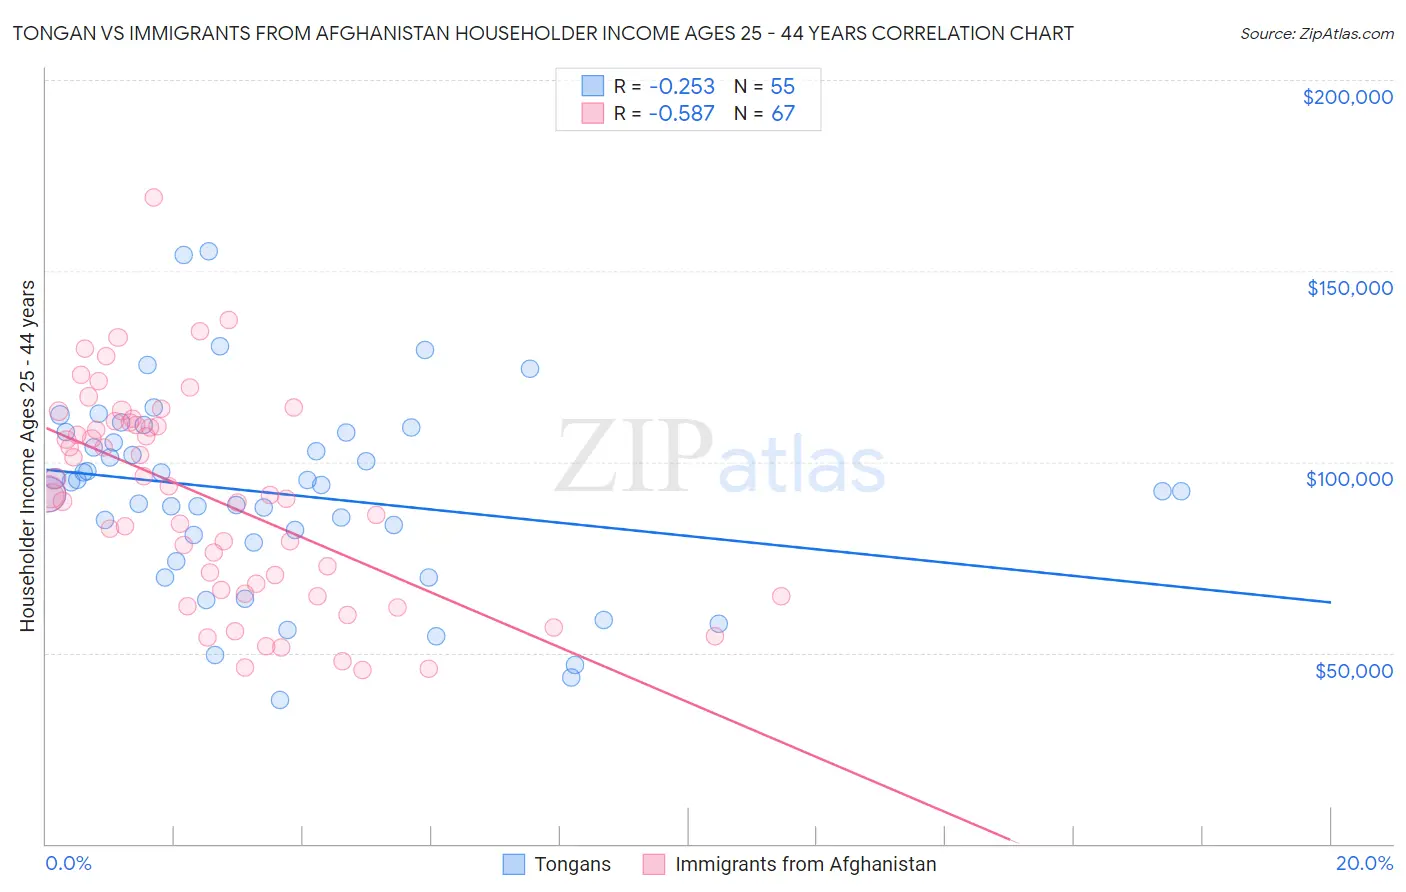 Tongan vs Immigrants from Afghanistan Householder Income Ages 25 - 44 years